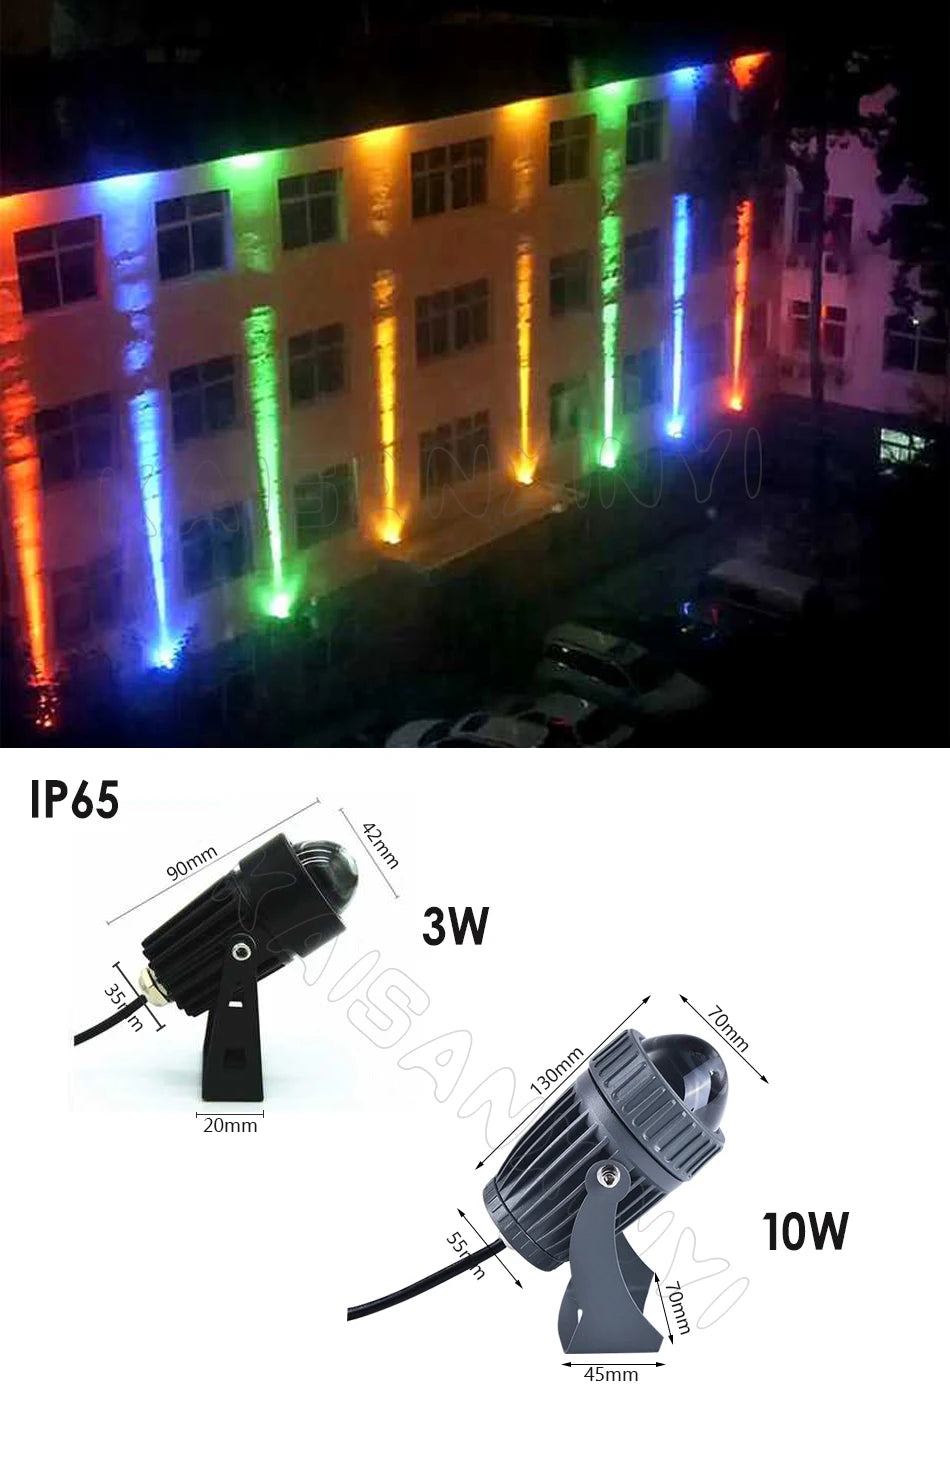 LED Lawn Light, Modern outdoor floodlight with IP65 protection, AC power, and LED bulbs.